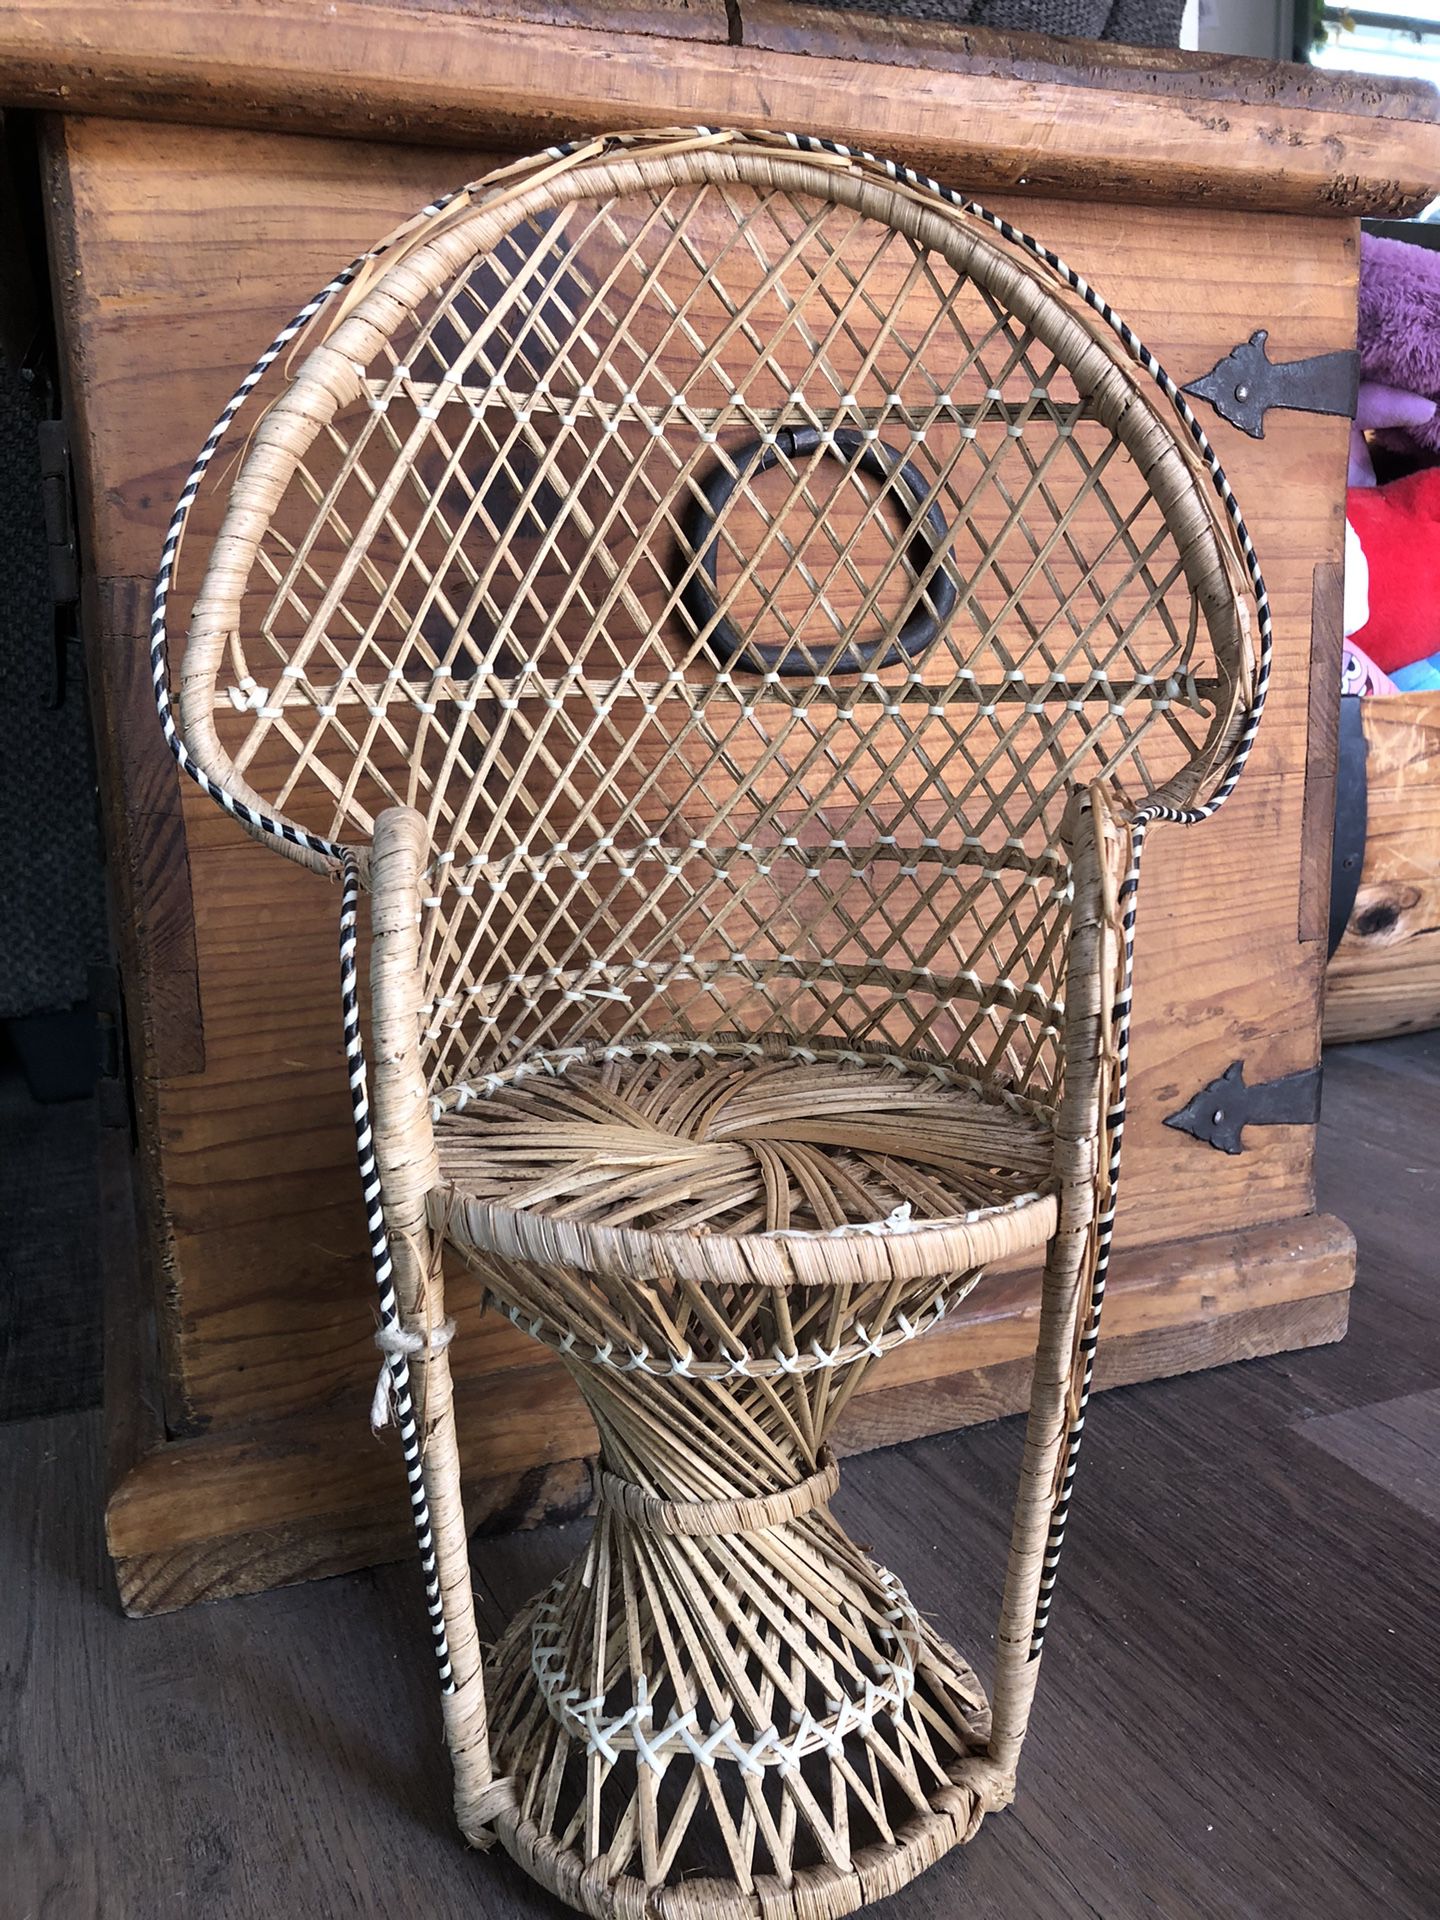 Vintage Wicker Rattan Peacock Chair Plant Stand Vtg Display Bohemian Home Decor Retro 70s 80s Bamboo Chair Doll Stand Collectible 